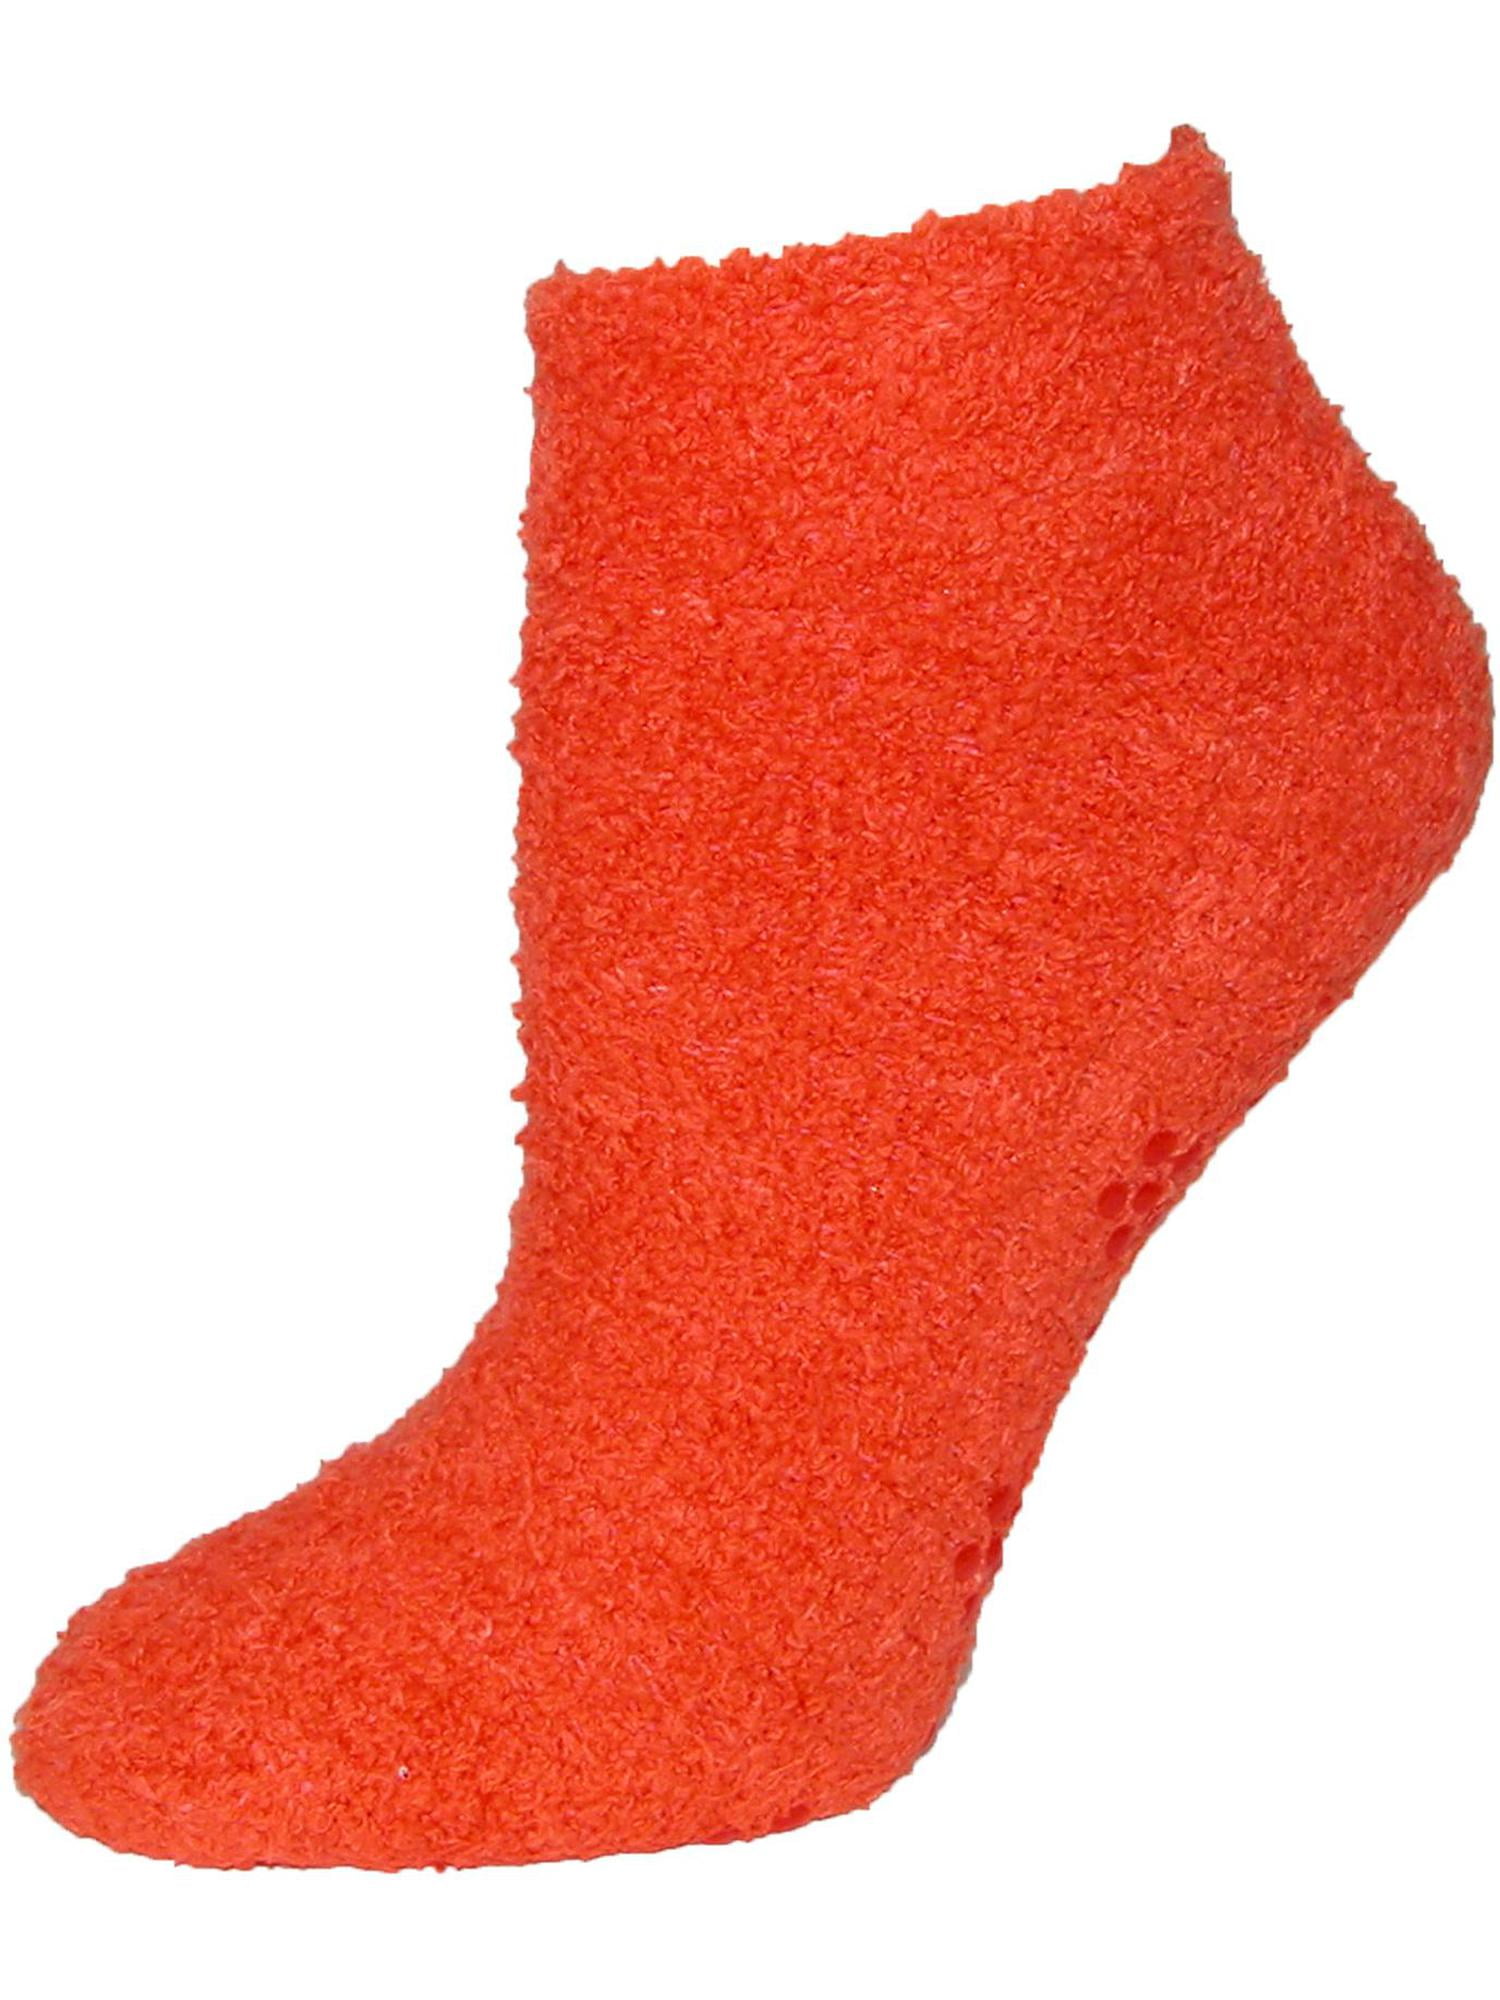 Show Slipper Socks With Grippers 